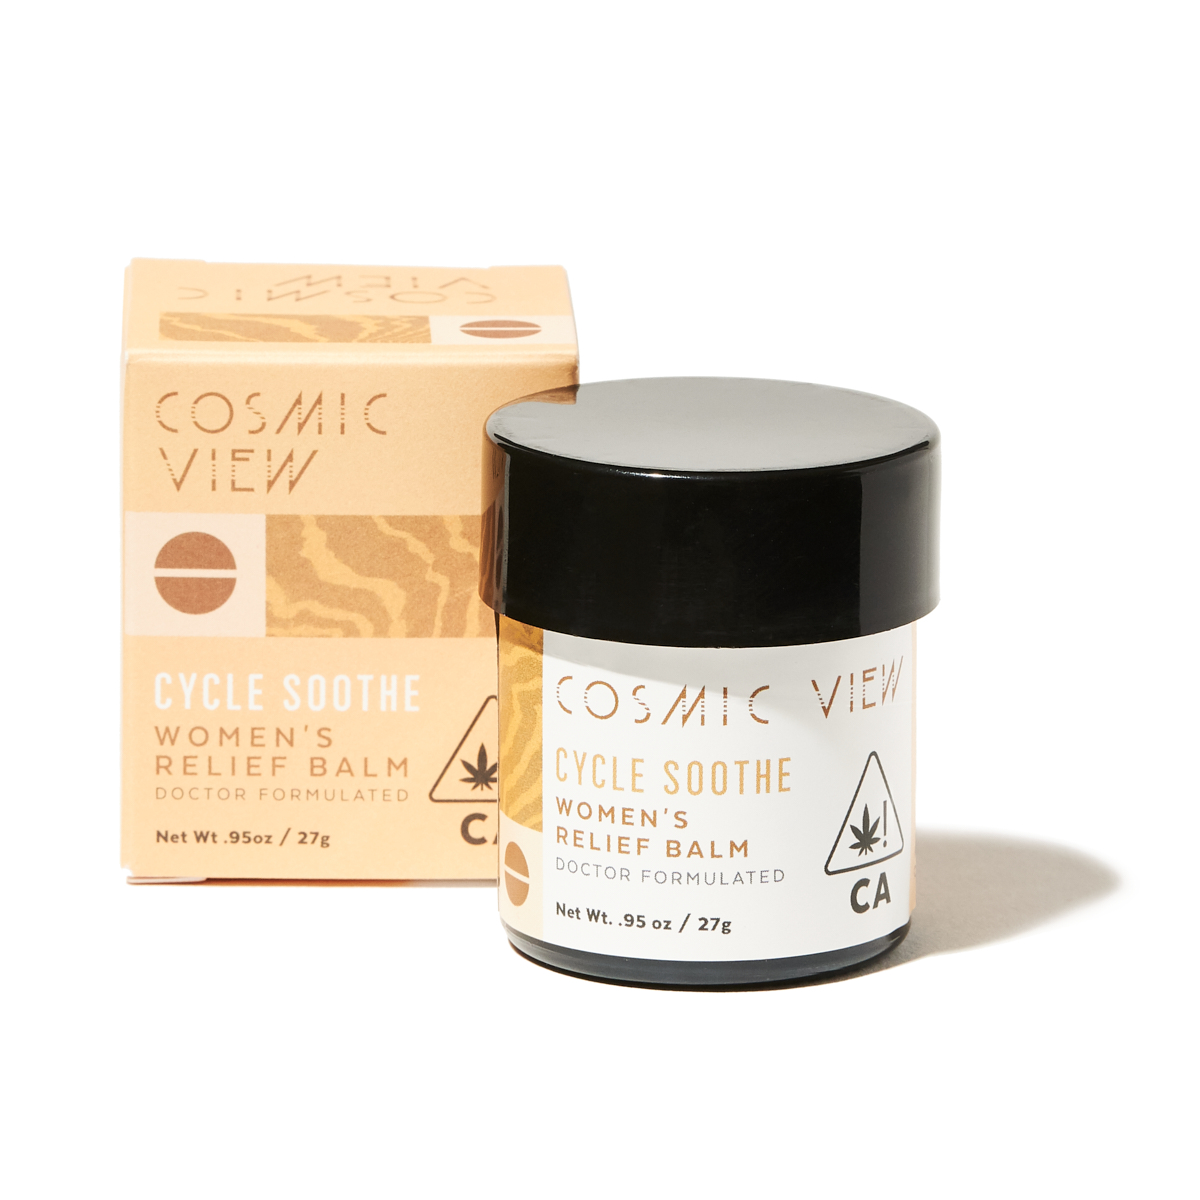 cosmic view cycle soothe reviews